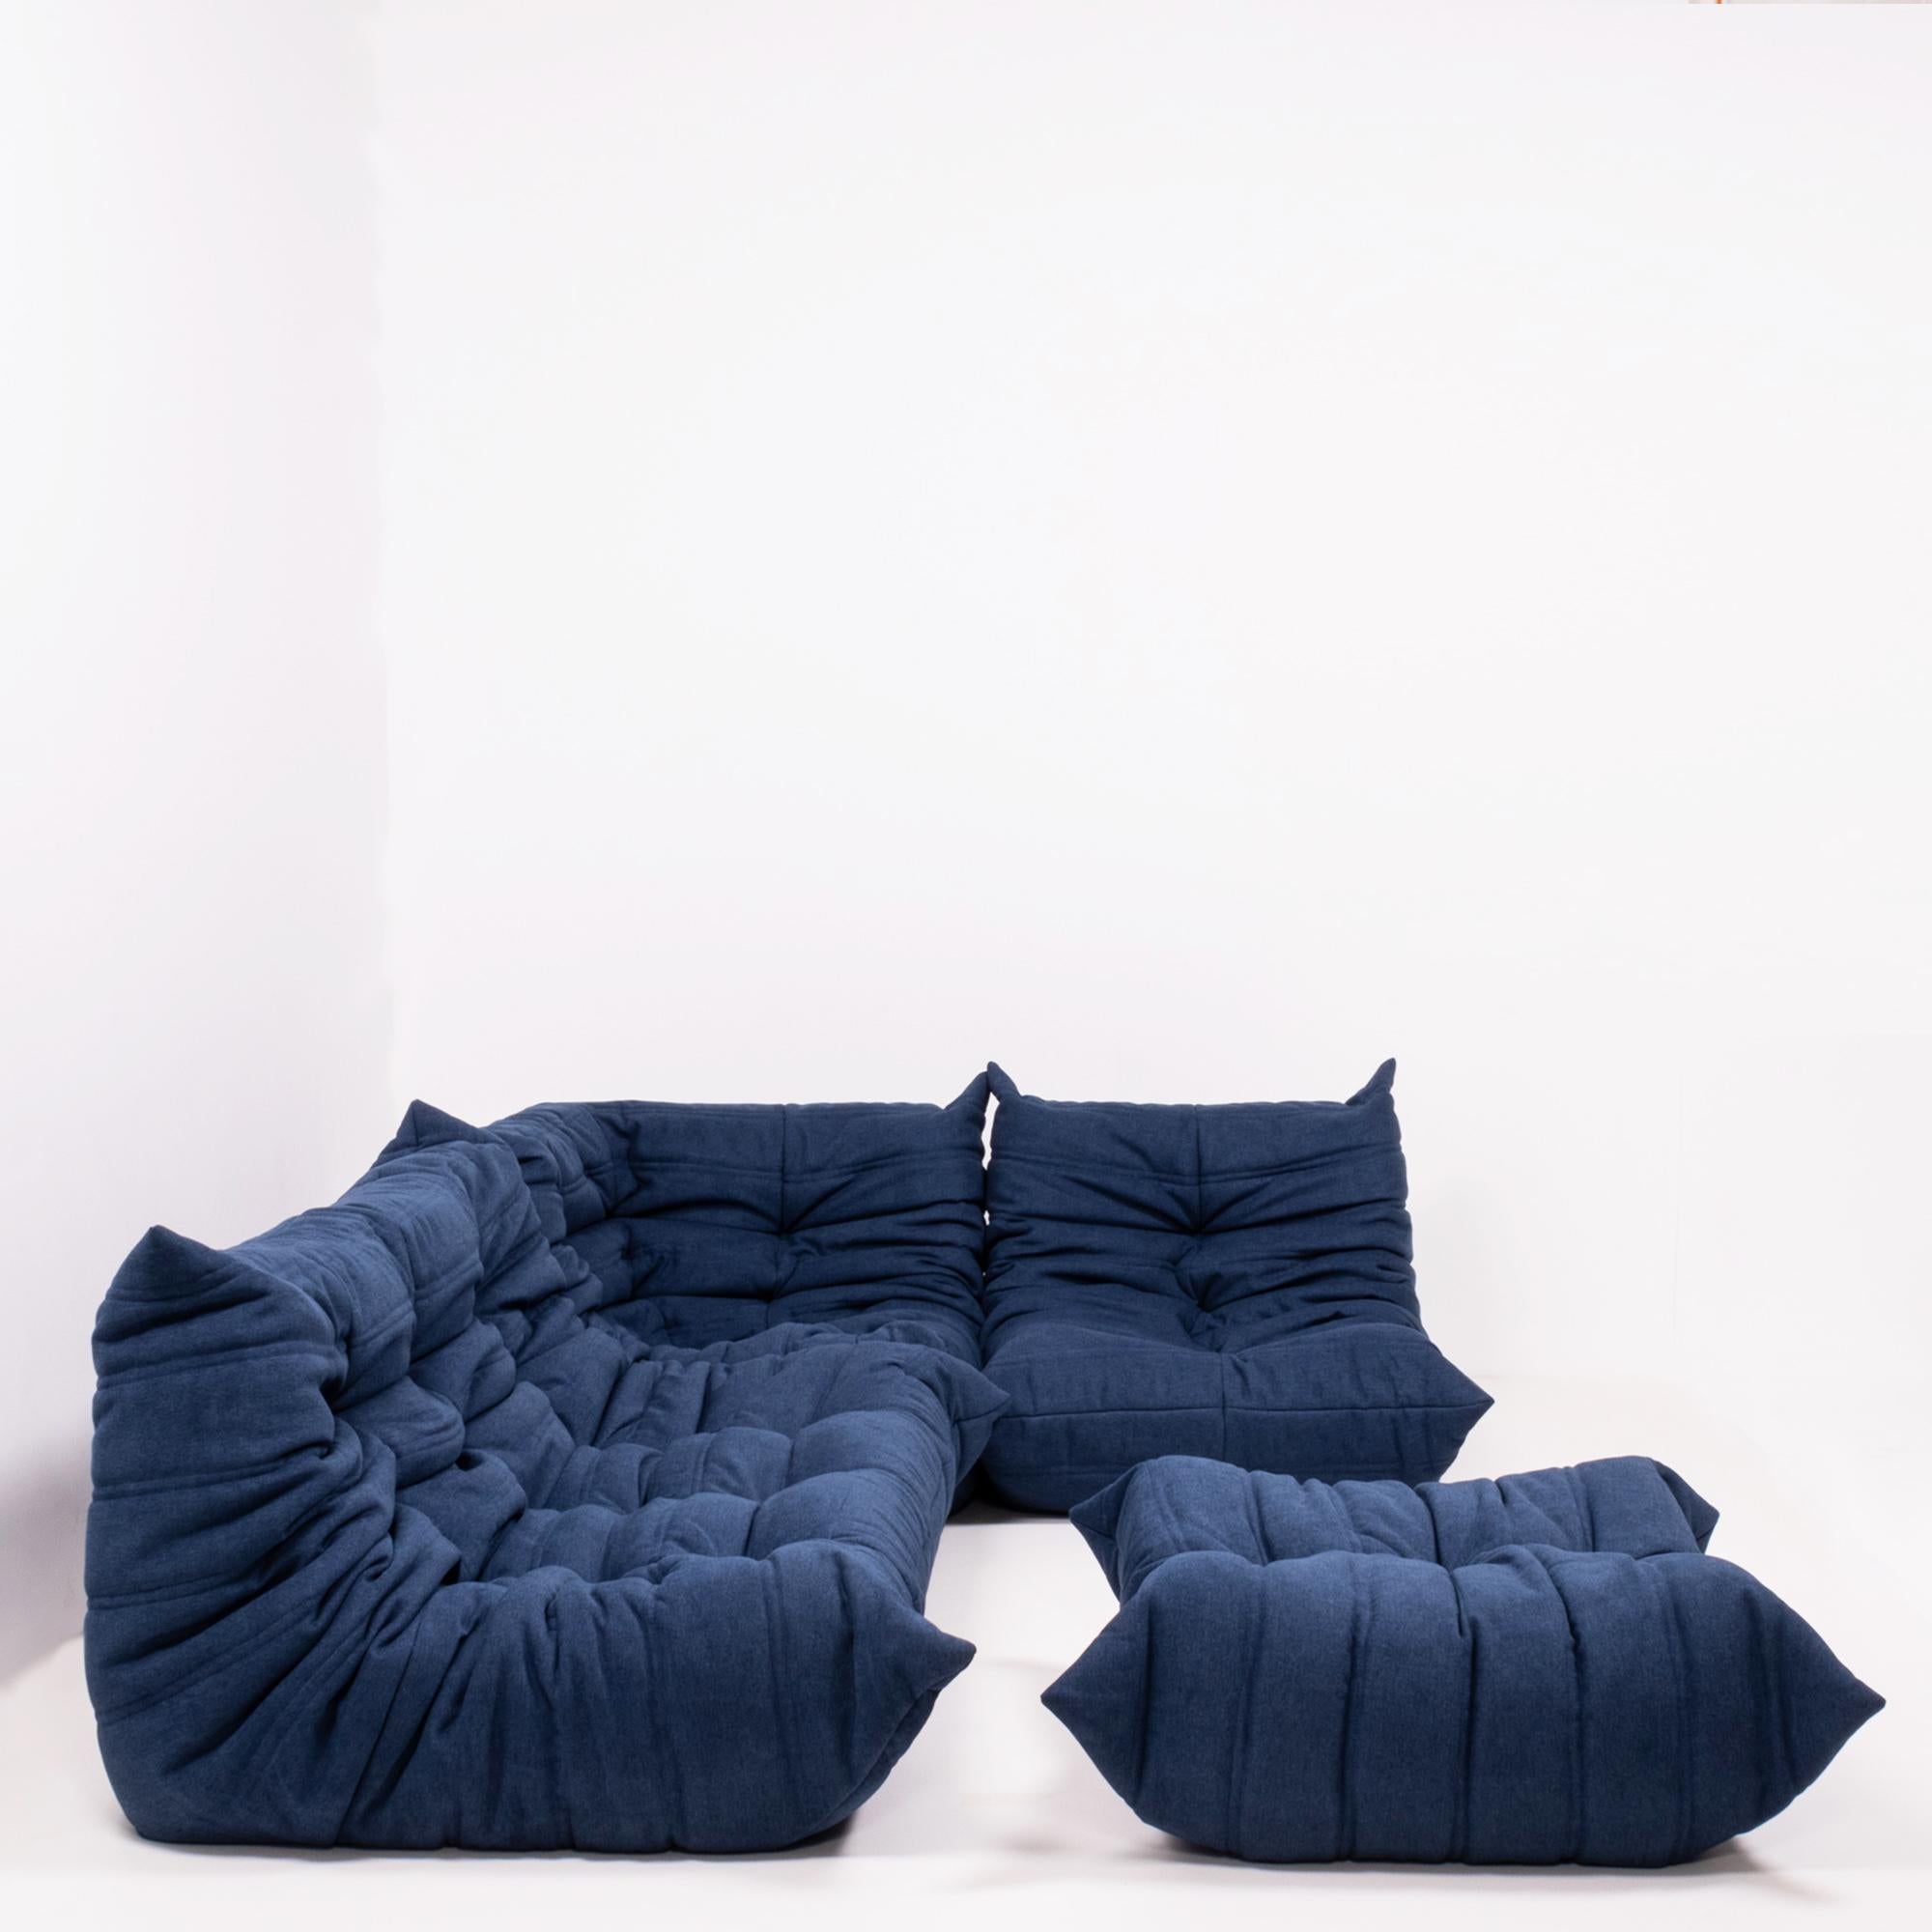 Togo Blue Modular Sofa and Footstool by Michel Ducaroy for Ligne Roset 1